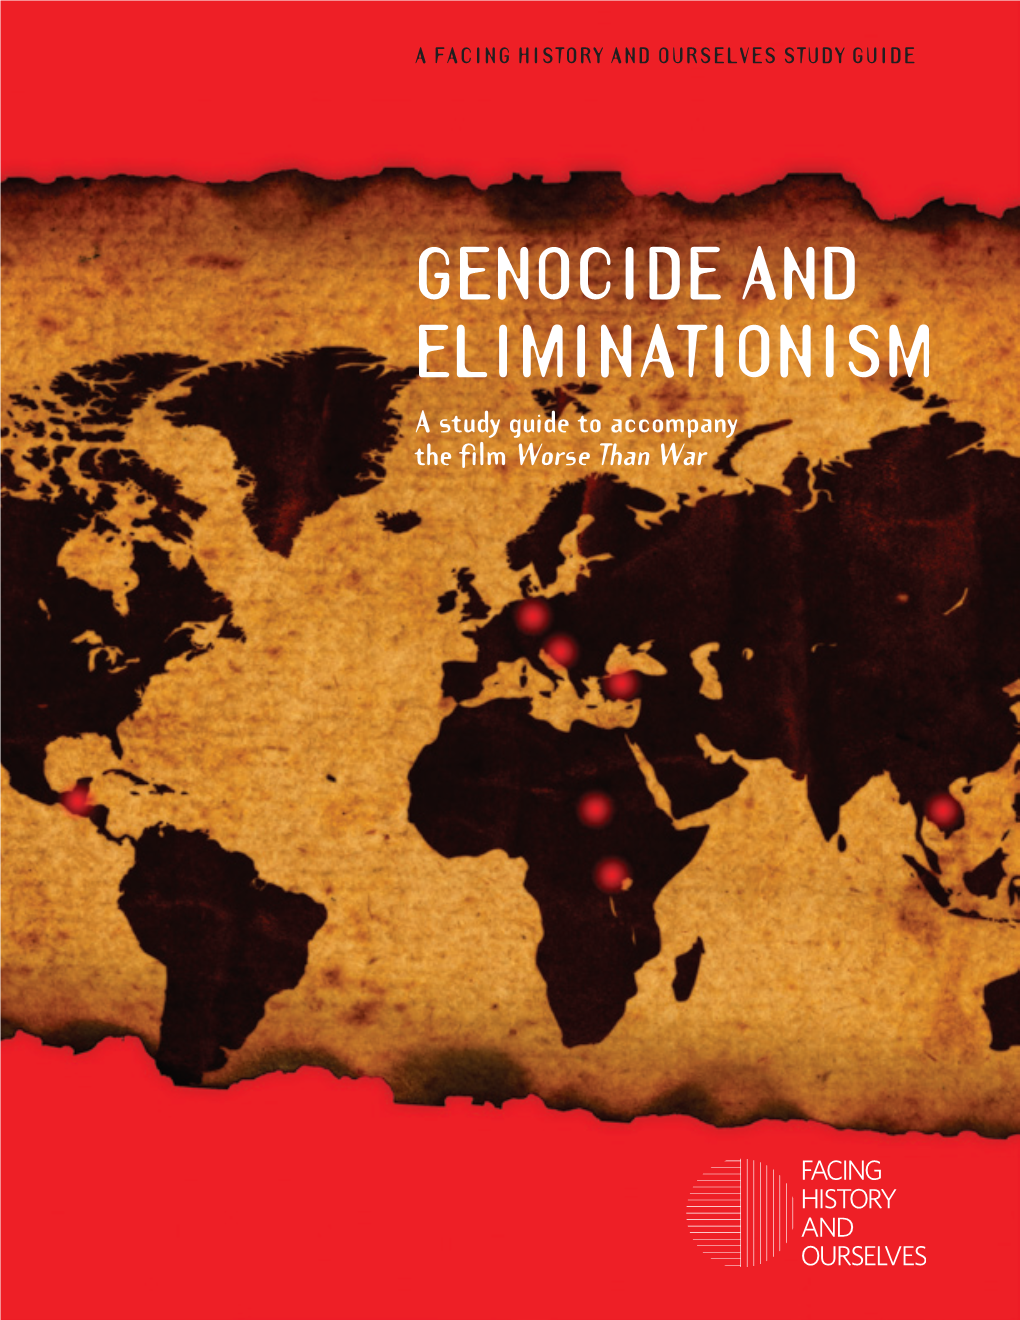 Genocide and Eliminationism a Study Guide to Accompany the Filmworse Than War a Facing History and Ourselves Study Guide